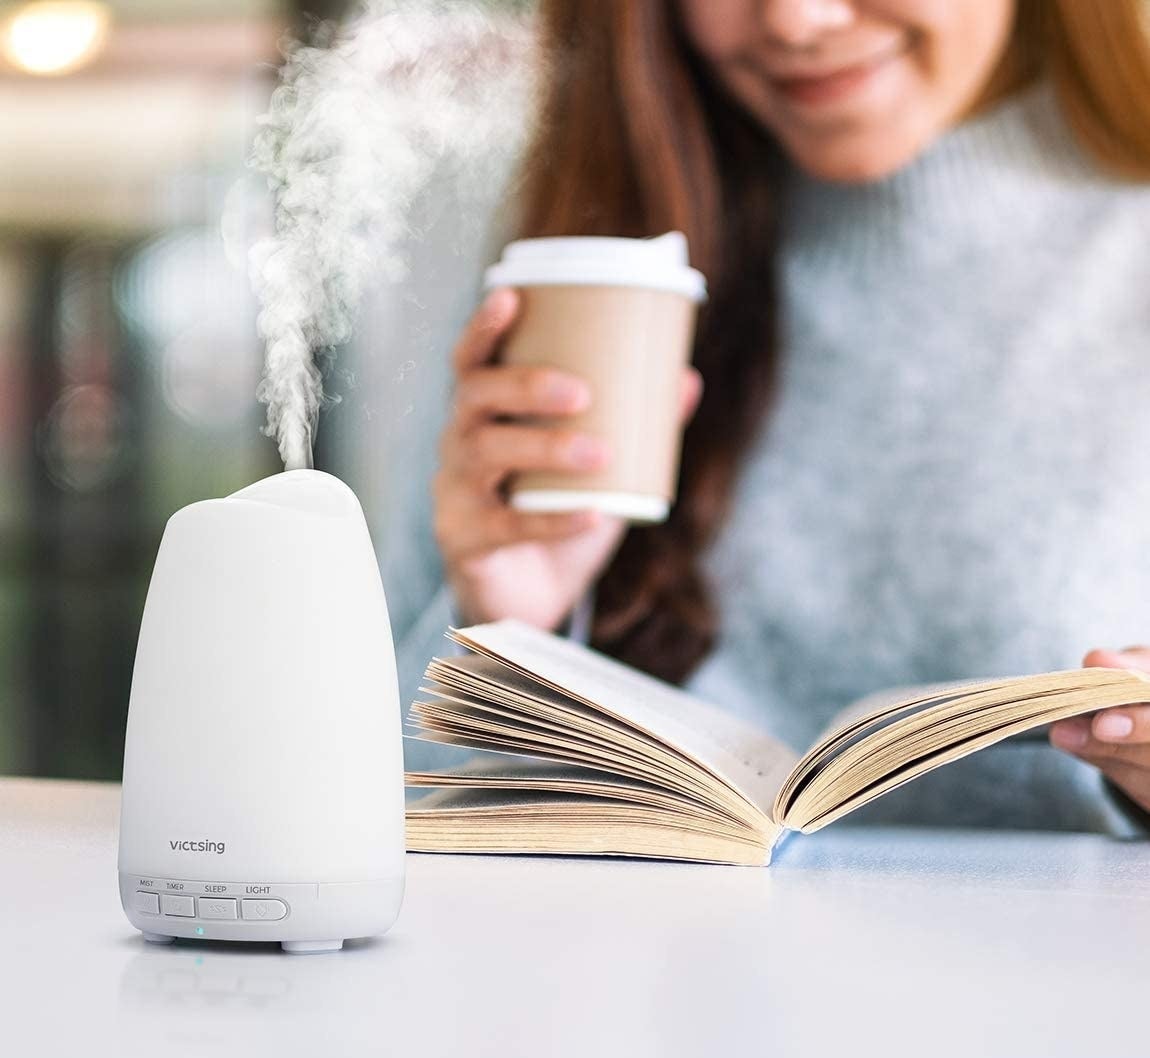 A person drinks a coffee while reading a book with the diffuser running in the foreground